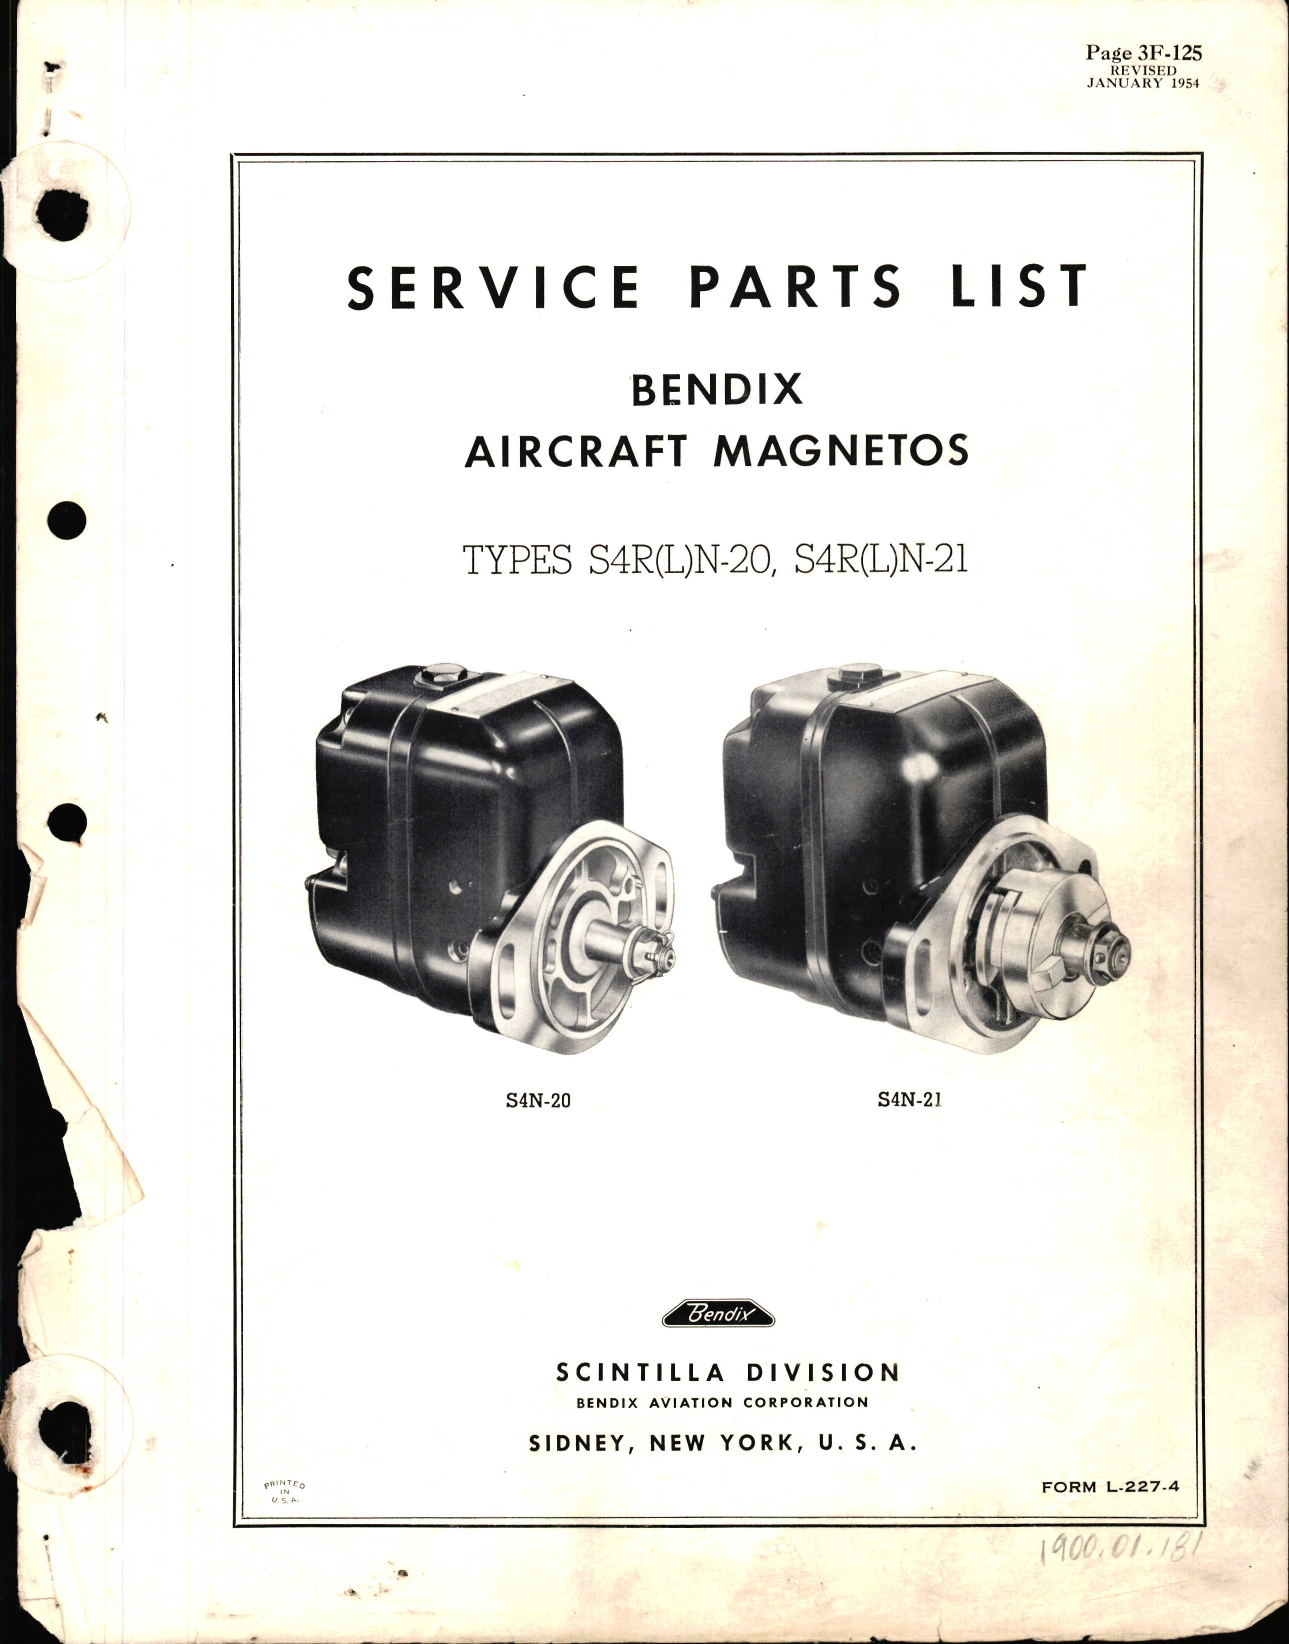 Sample page 1 from AirCorps Library document: Service Parts List for Bendix Aircraft Magnetos S4R(L)N-20 and S4R(L)N-21